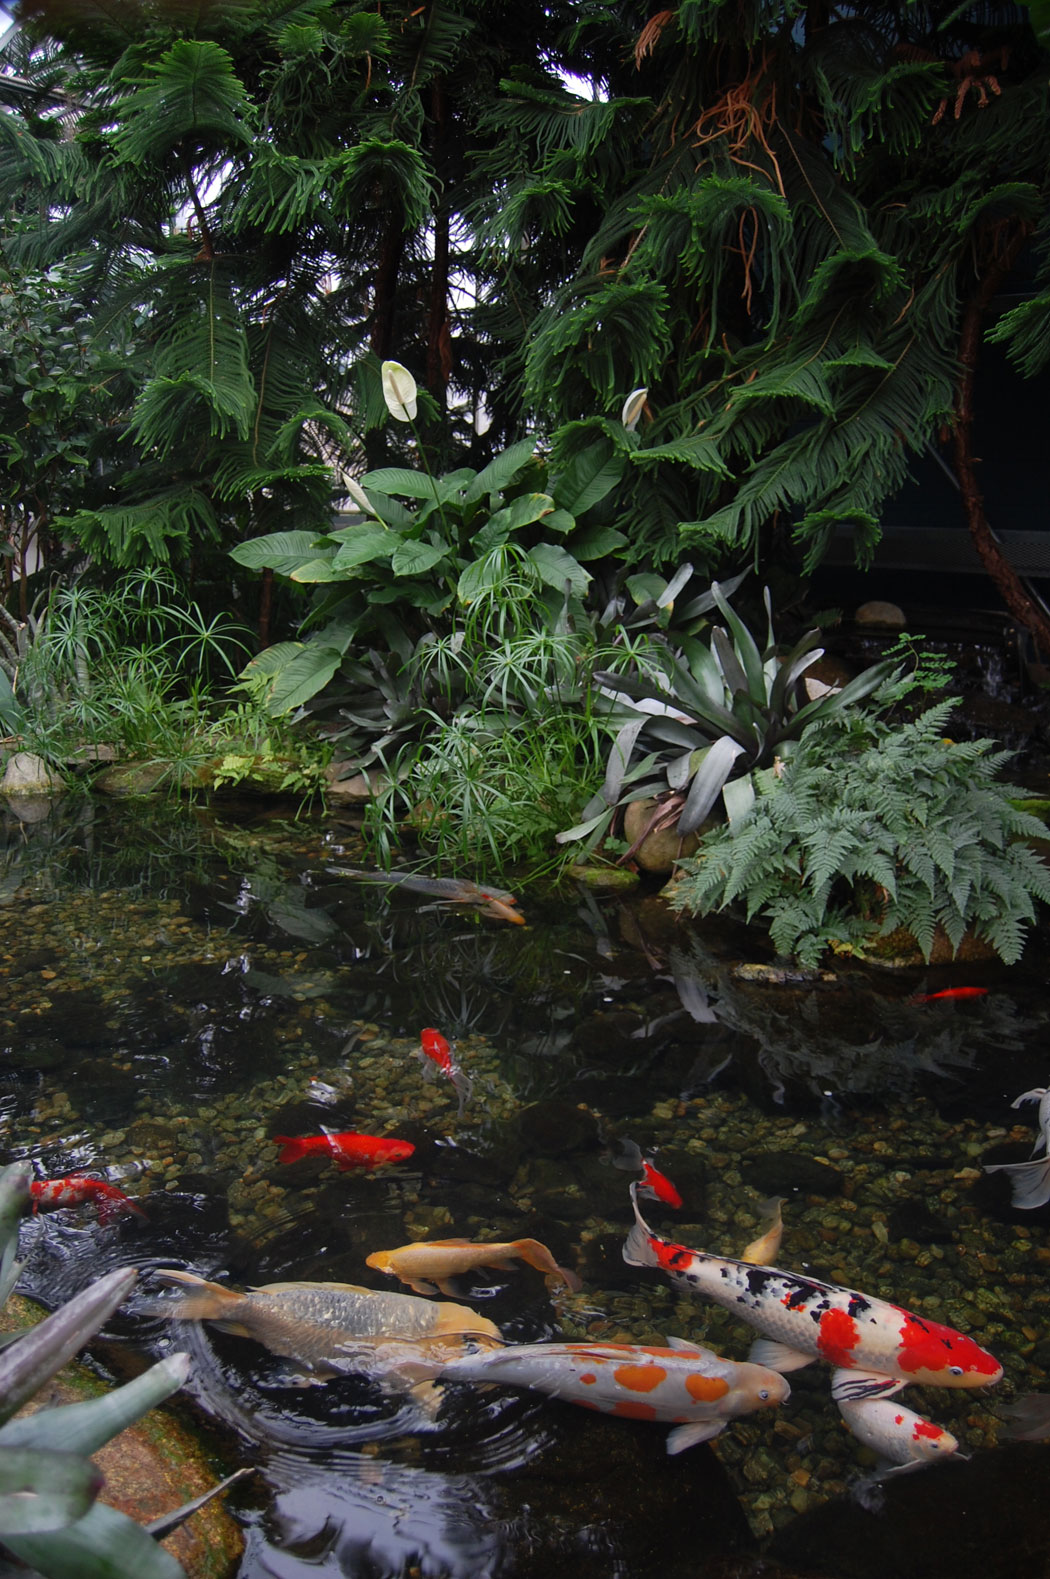 Fish pond in the Botanical Center at Roger Williams Park in Providence. (Greg Cook)